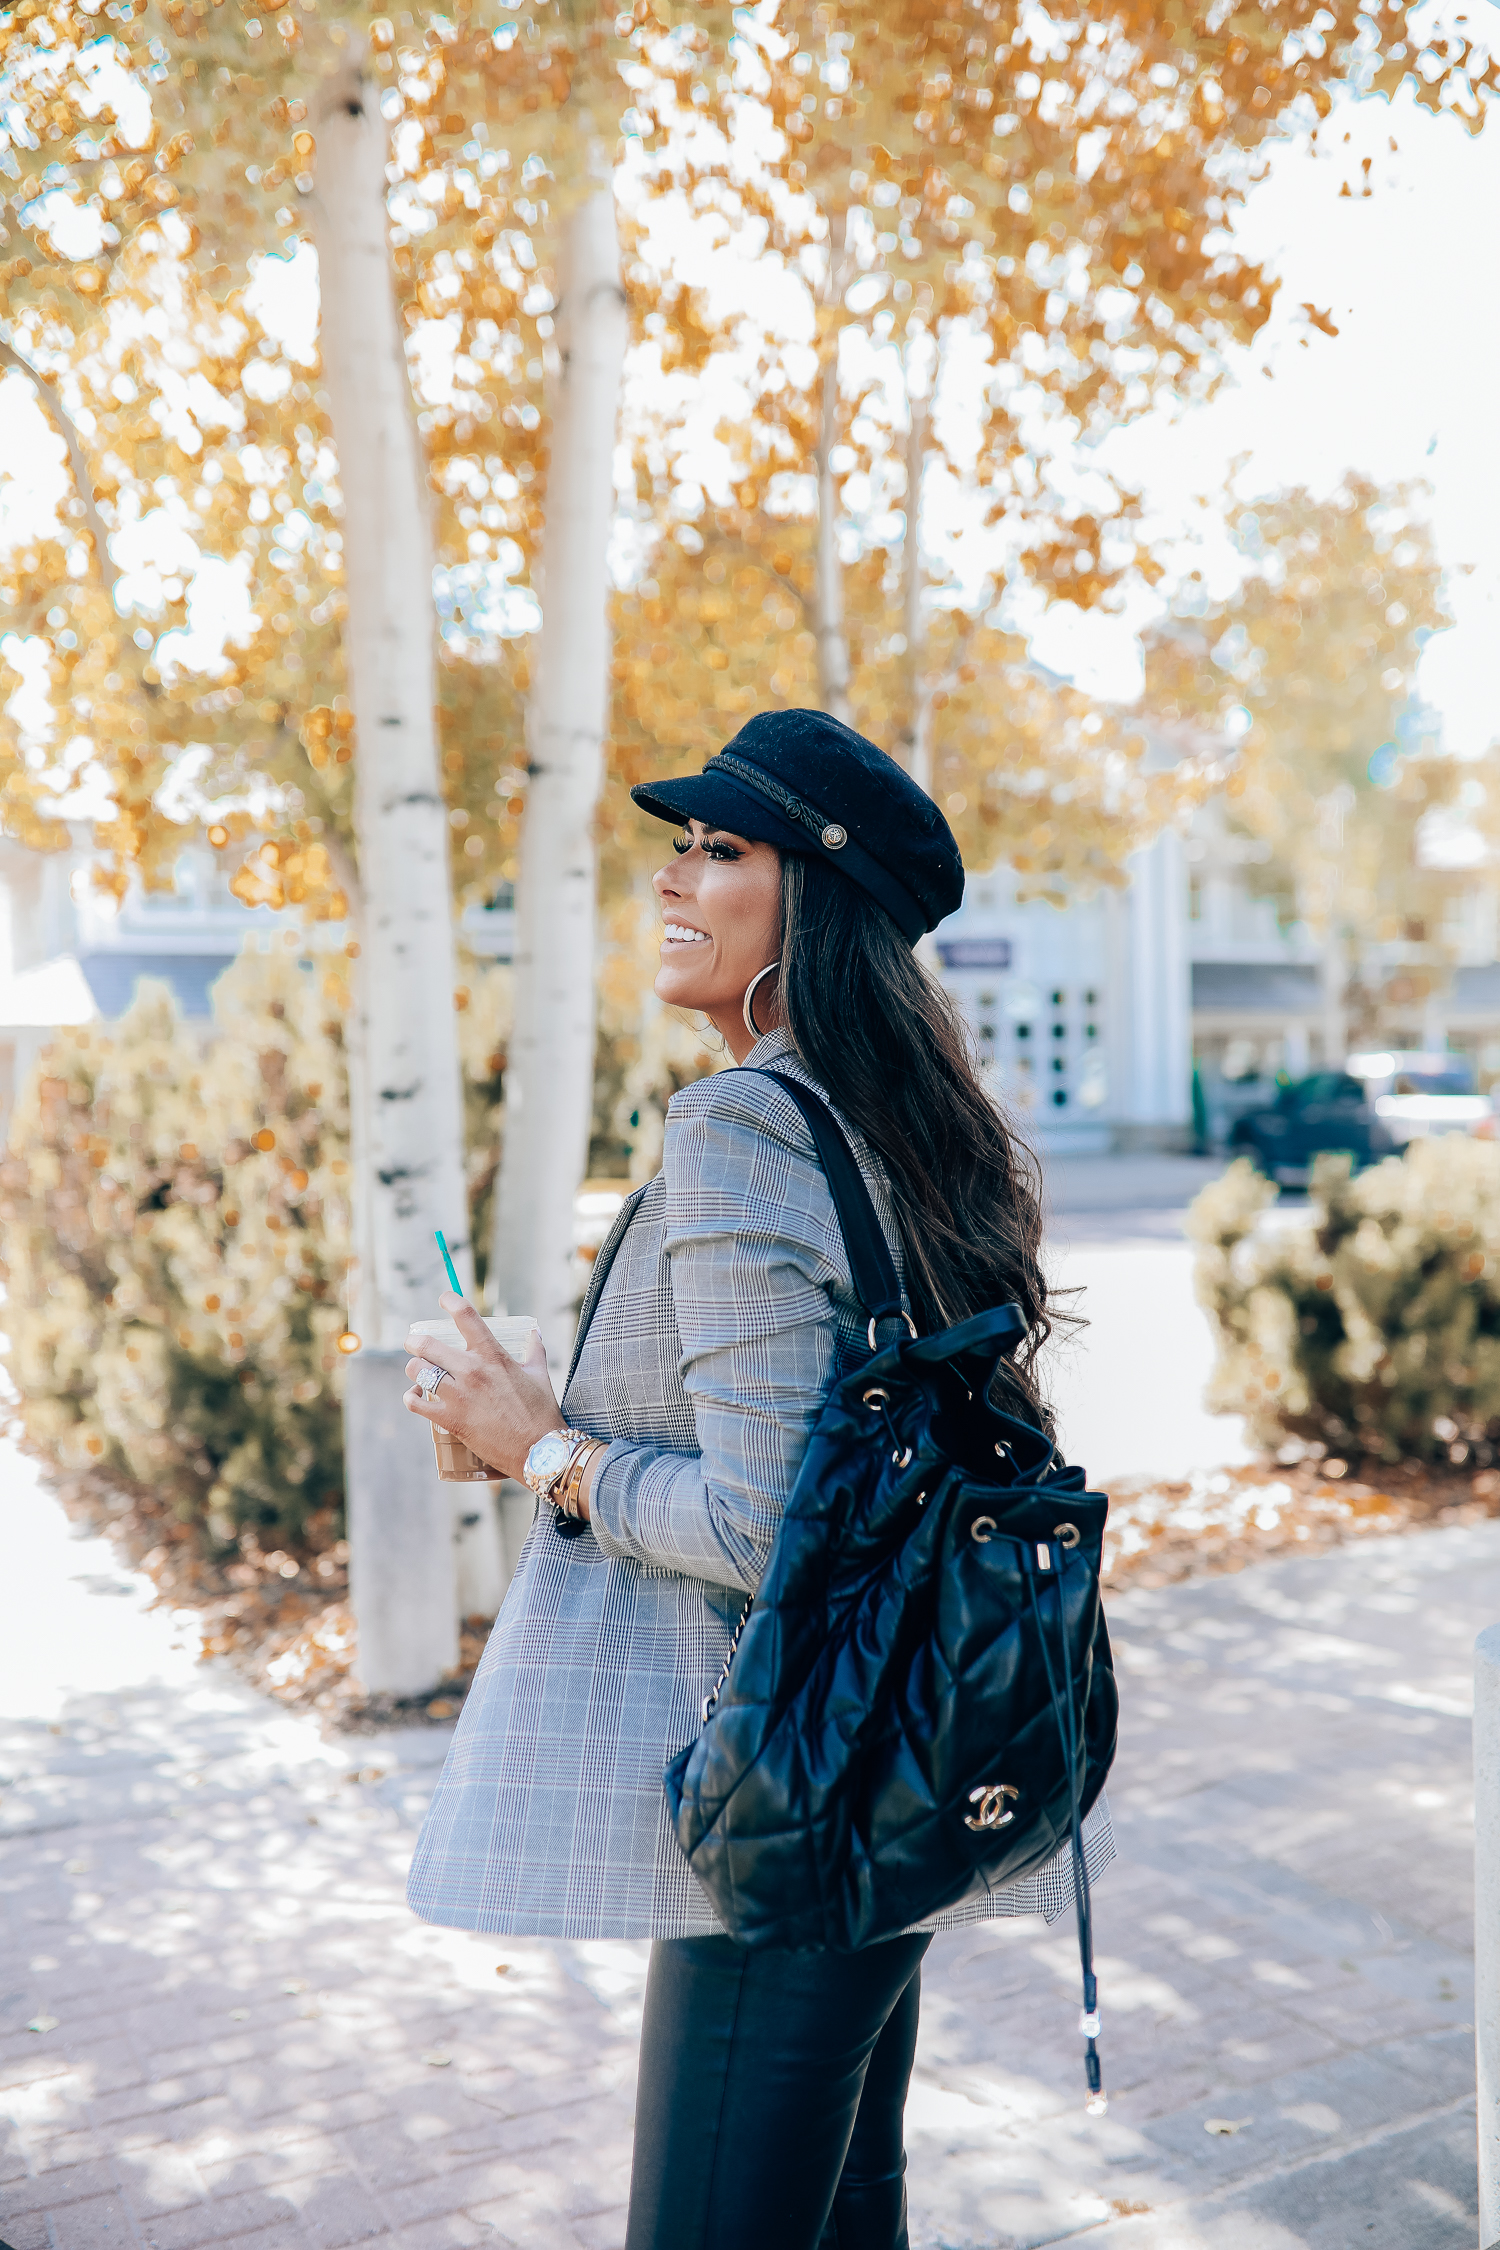 Oversized plaid blazer styled for Fall by top US fashion blog, The Sweetest Thing: image of a woman wearing an Aqua oversized plaid blazer, Splendid long sleeve top, BlankNYC vegan leggings, Marc Fisher booties, Chanel backpack, Baker boy cap, a Rolex watch, Argento Vivo earrings, and Cartier bracelets | fall fashion outfits pinterest 2019, plaid blazer outfit fall, leather pants outfit fall, how to style a plaid blazer fall trends 2019, emily ann gemma-19